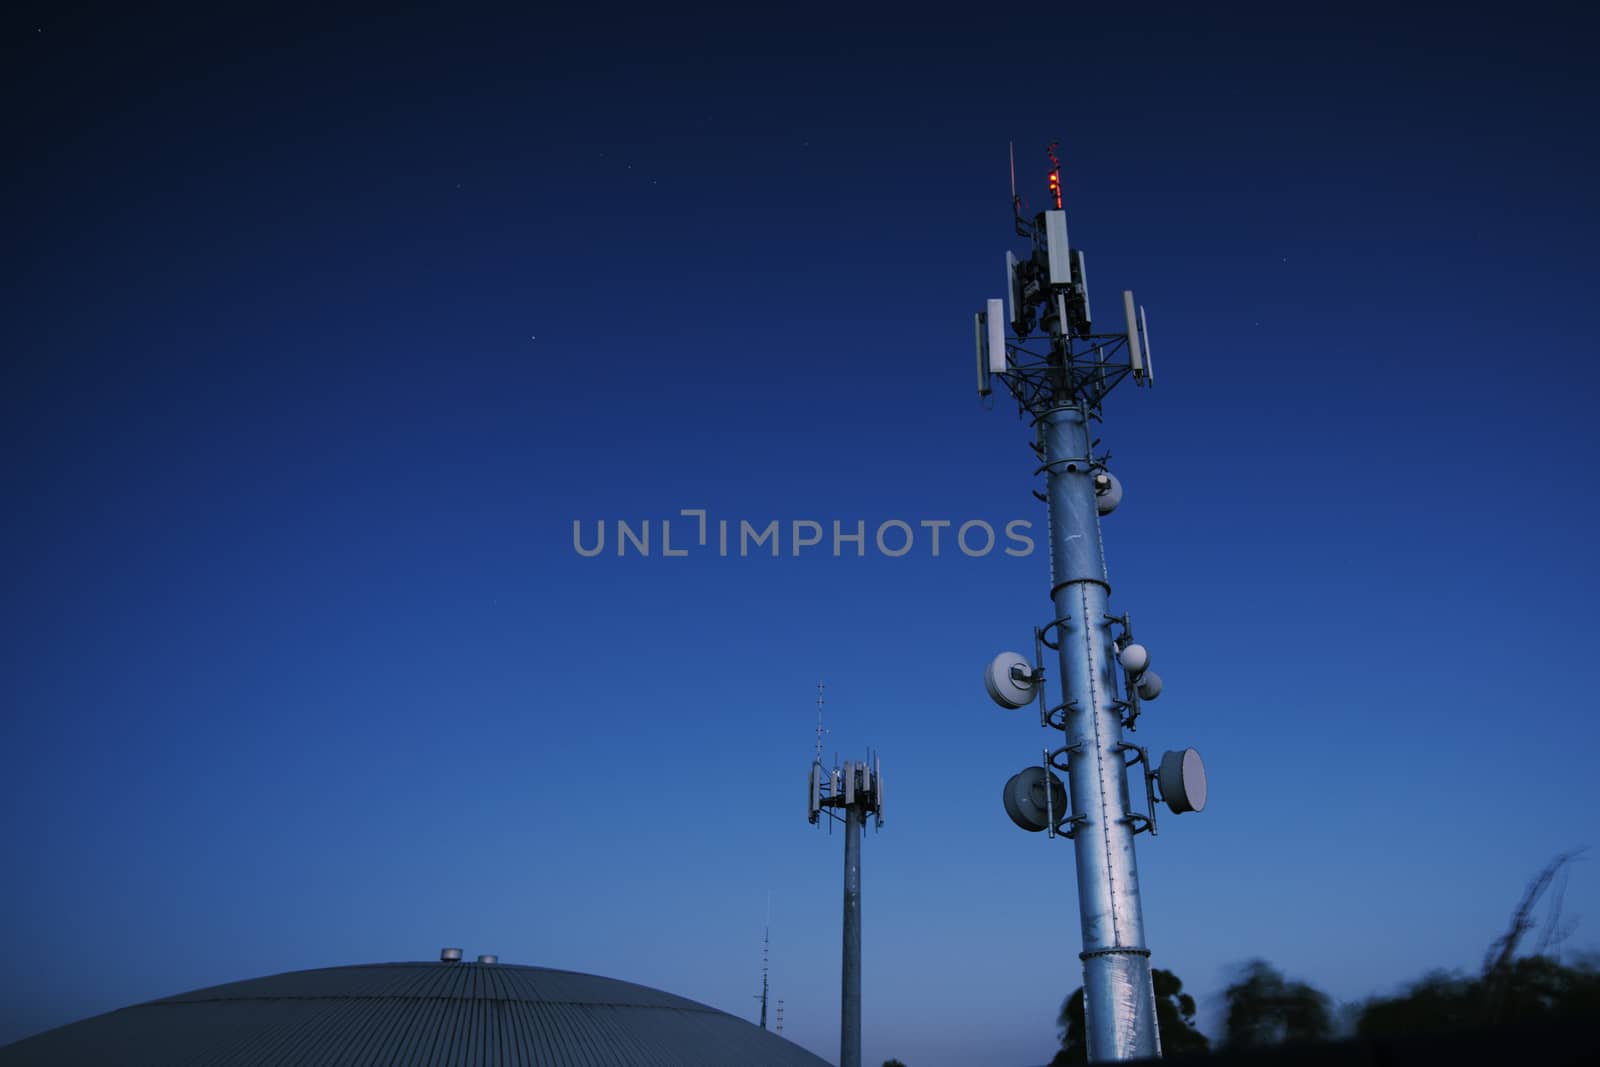 Communications and radio tower in Ipswich City, Queensland.